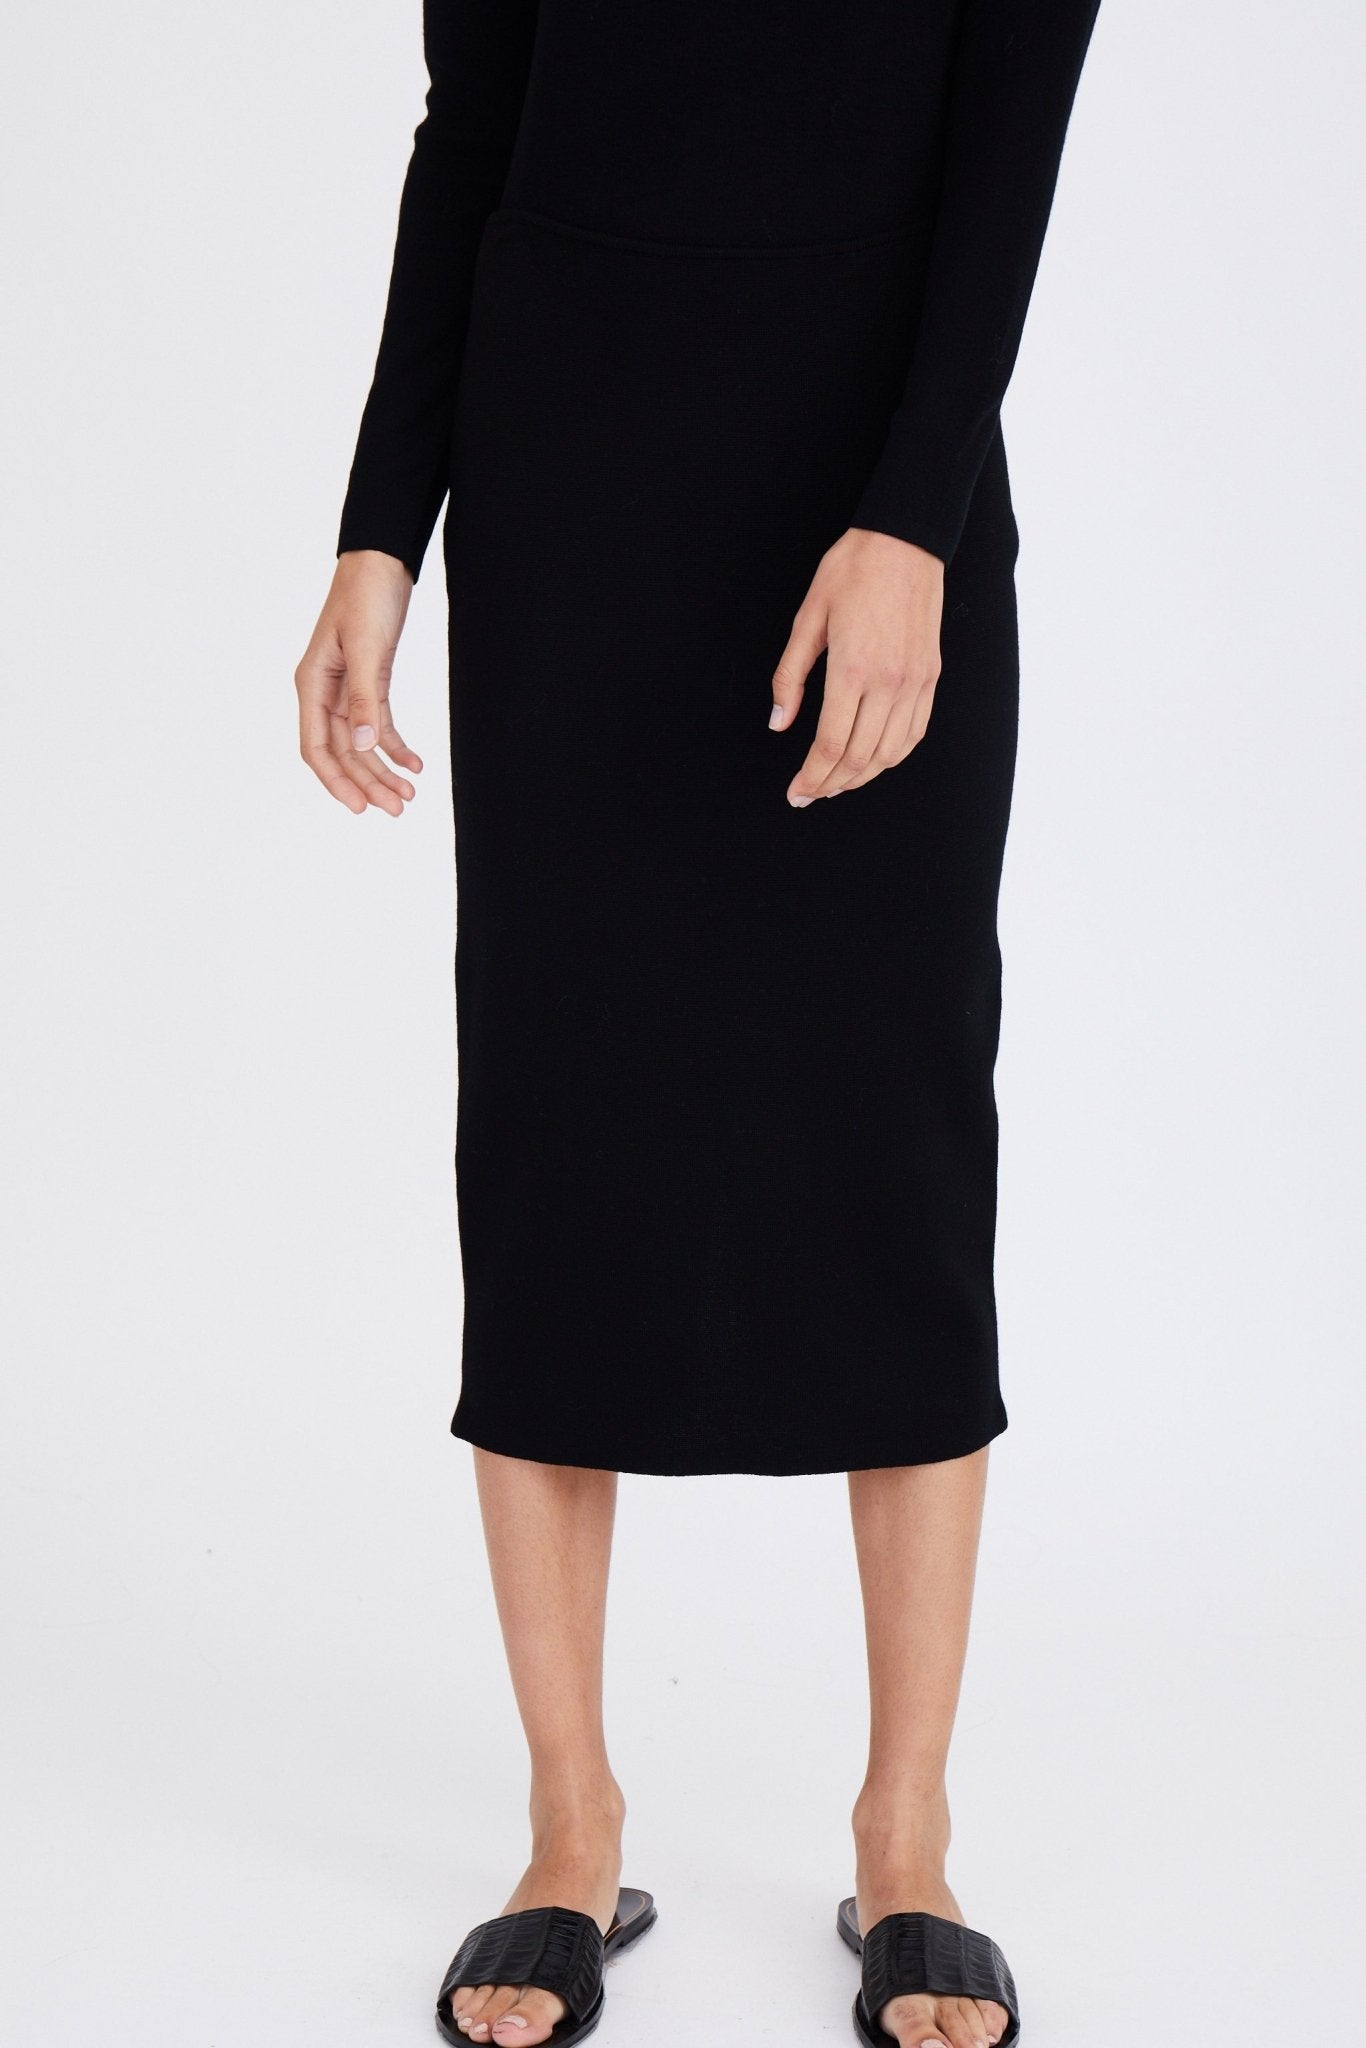 MADISON FITTED PENCIL SKIRT IN SUPER FINE MERINO KNIT - Jarbo